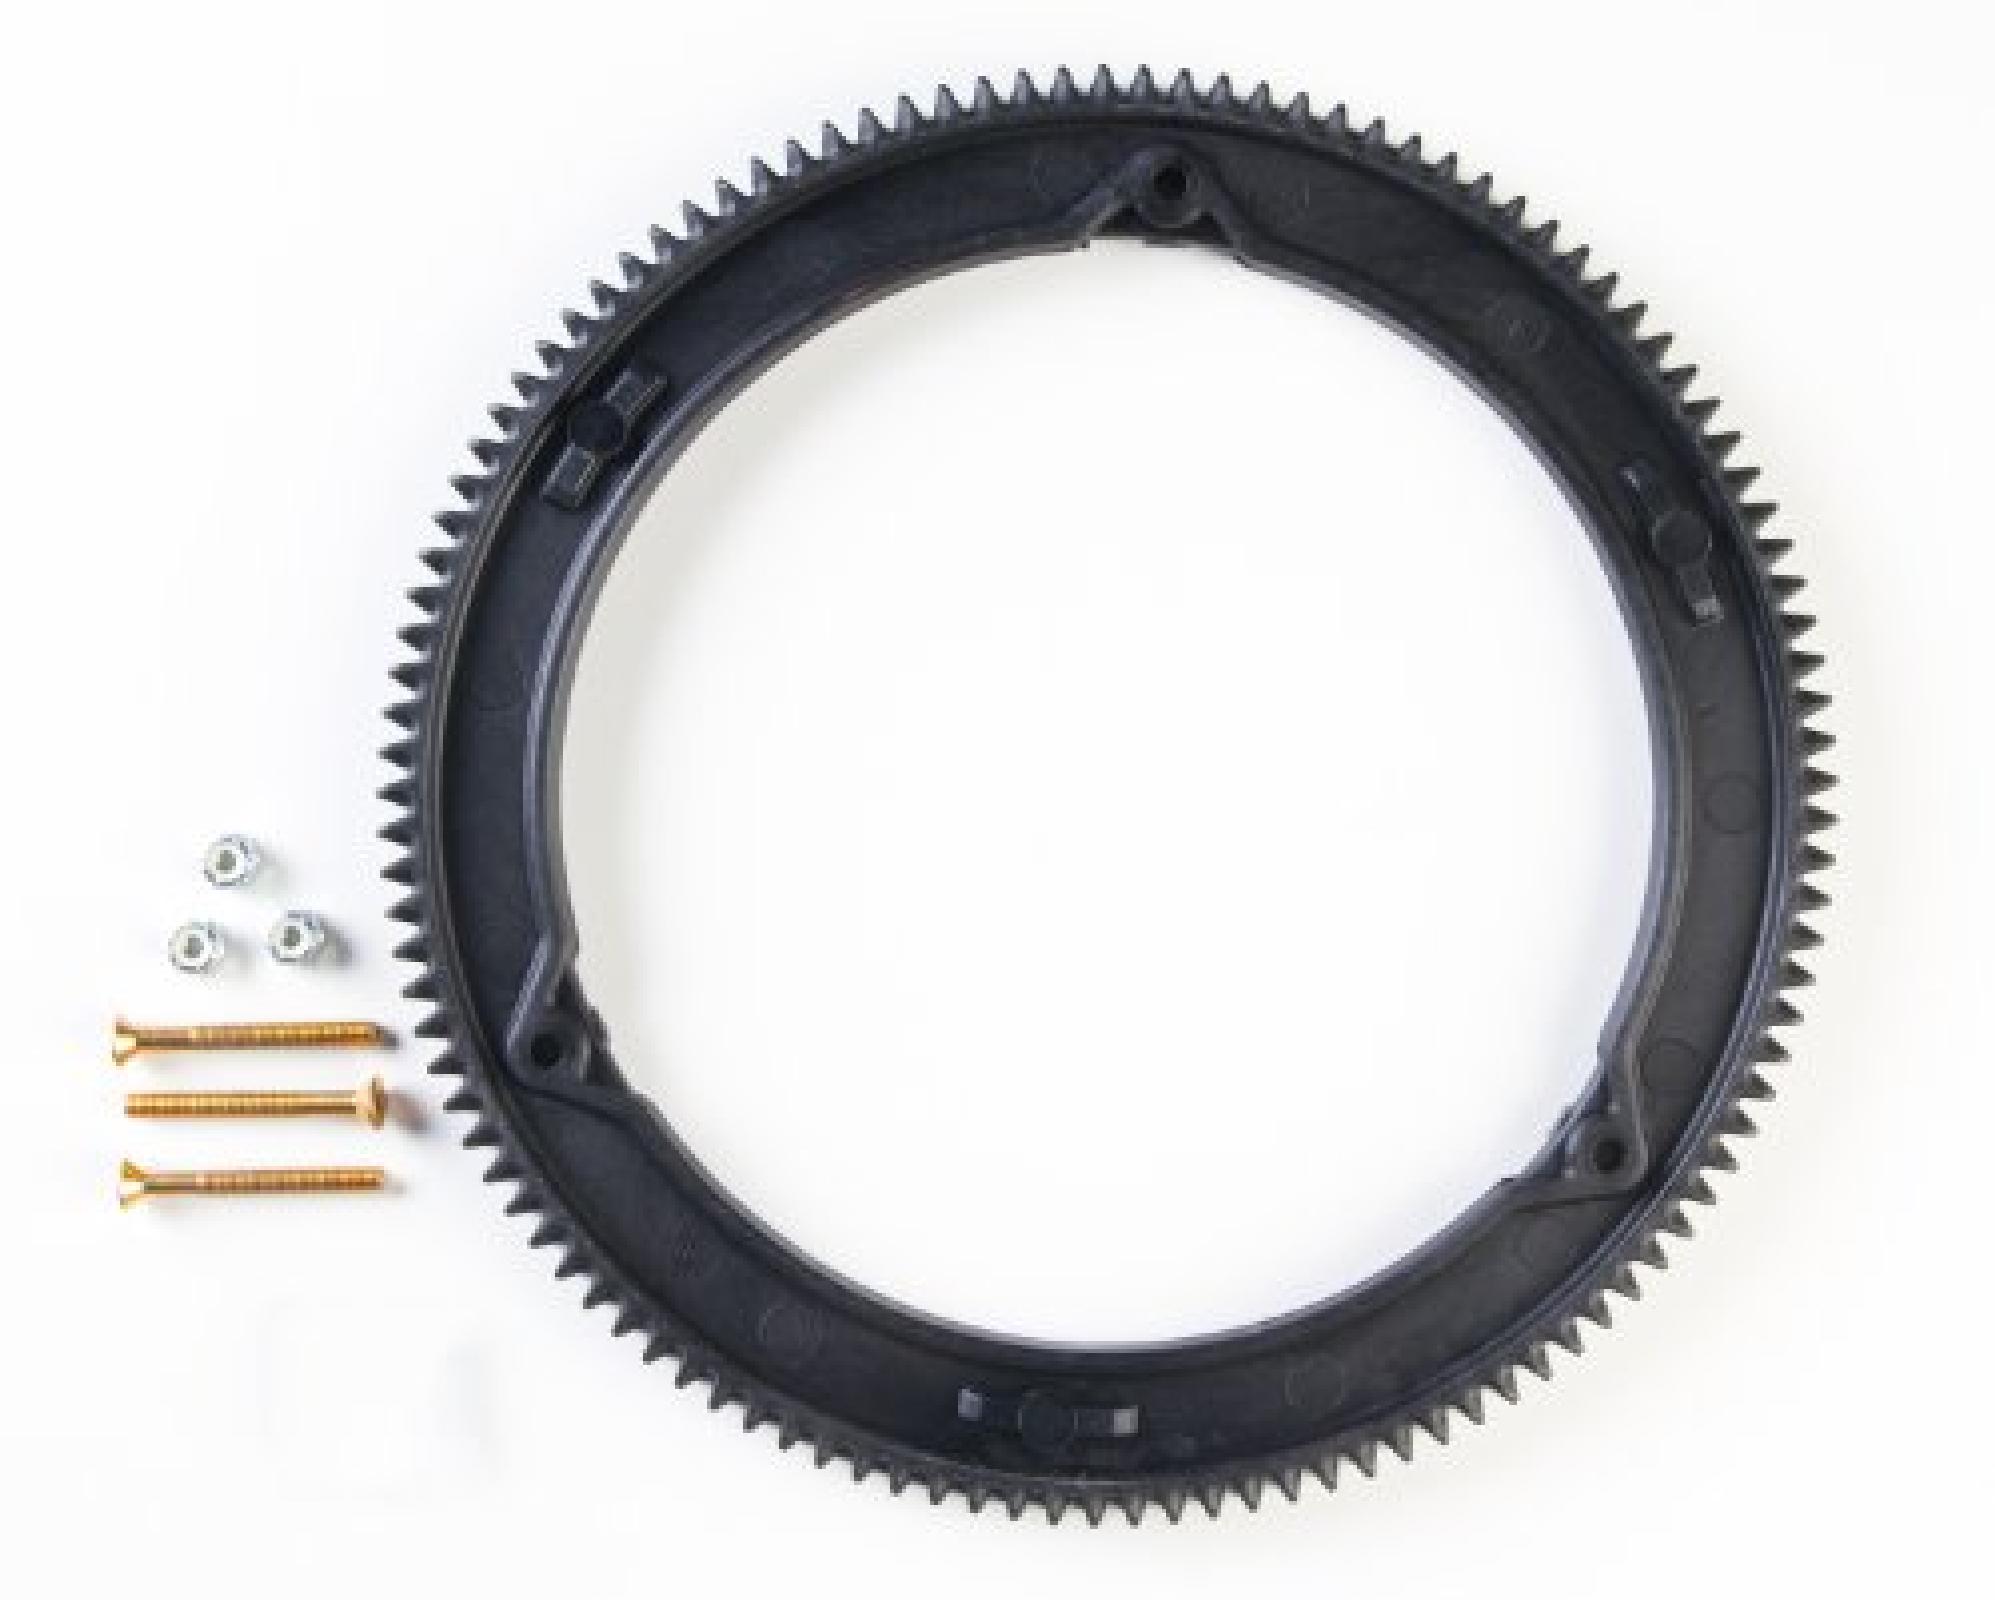 GEAR-RING part# 499612 by Briggs & Stratton